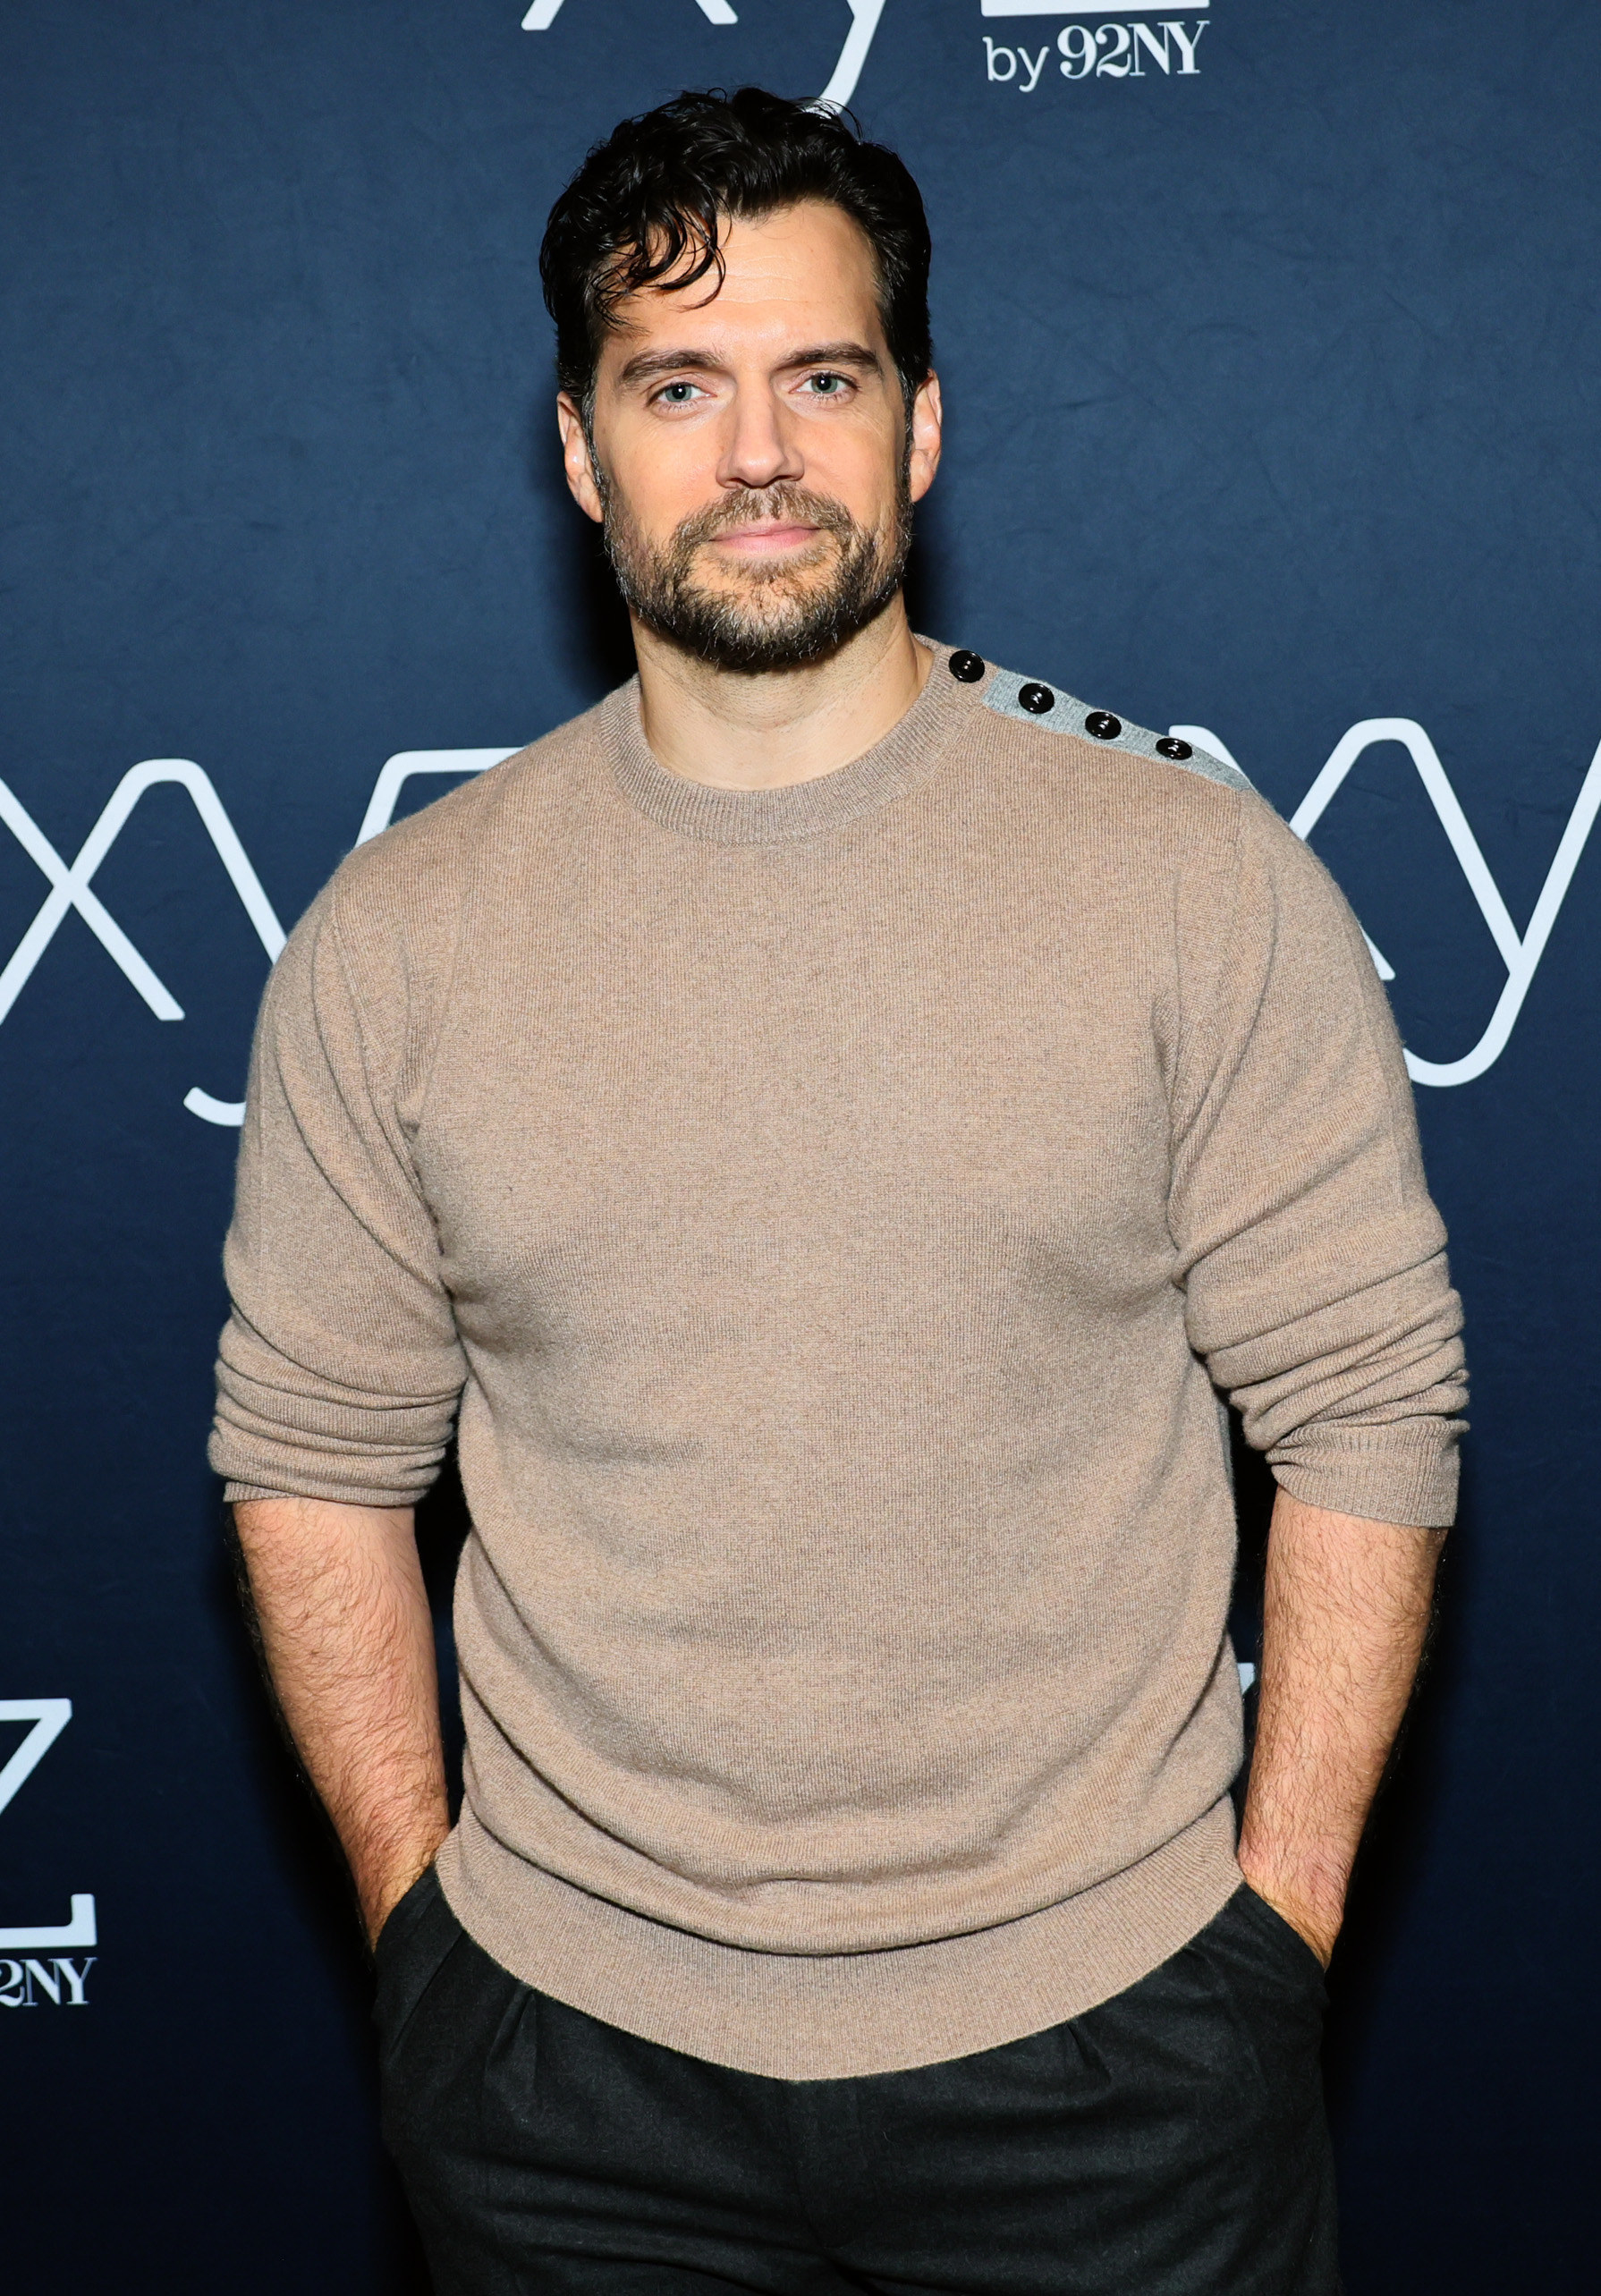 Henry Cavill Makes Red Carpet Debut With Girlfriend Natalie Viscuso